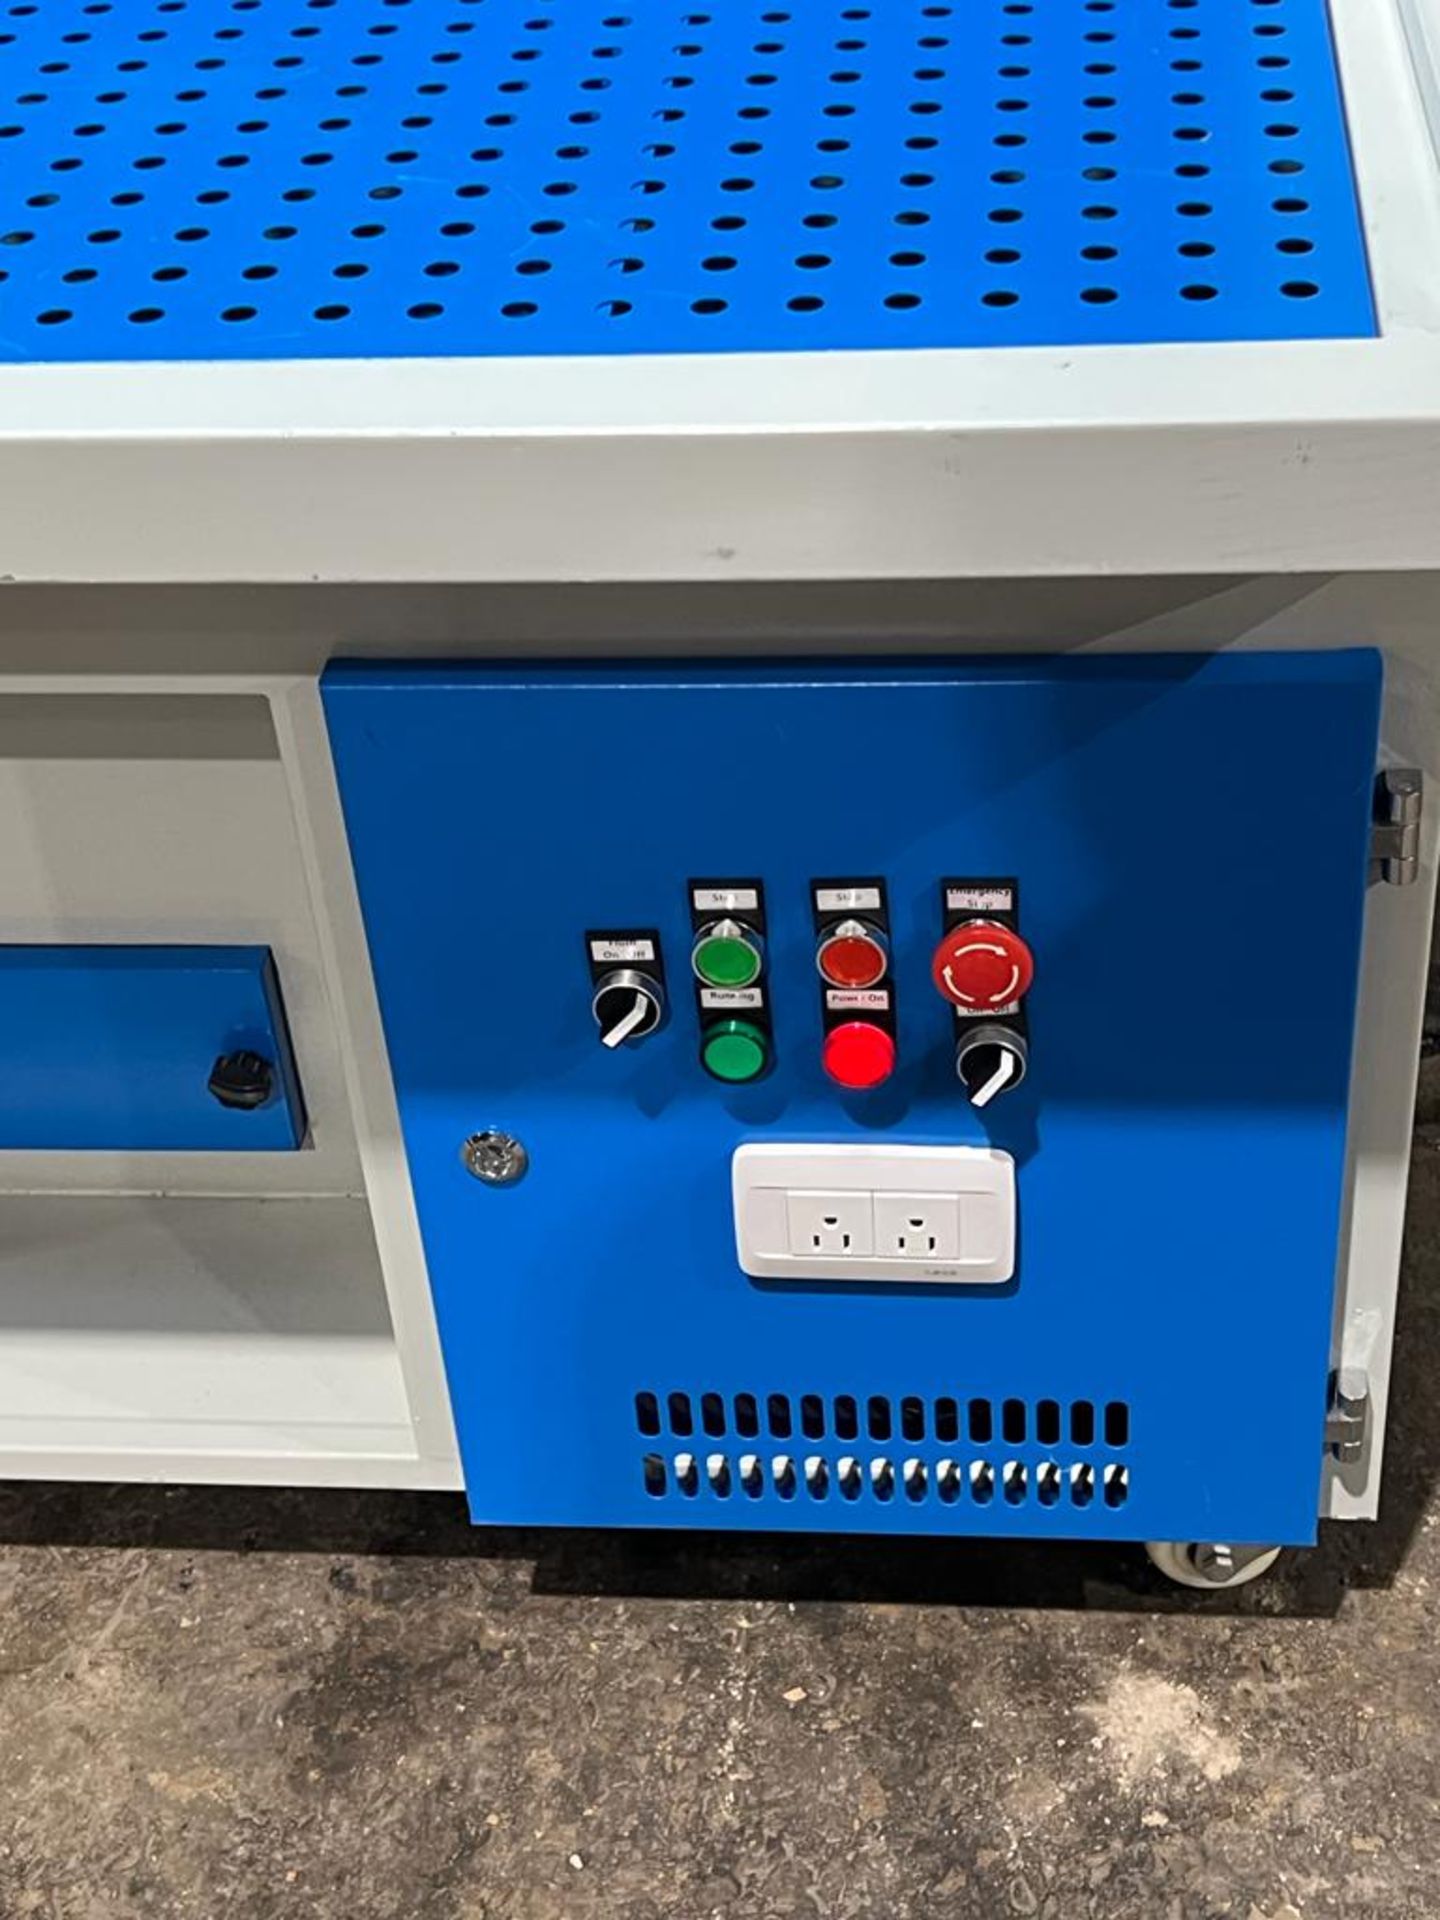 NEW Pneu-Airtec Fume Extracting Downdraft Work Table - 2.2KW 110V 1 Phase Unit with Light - Image 2 of 3